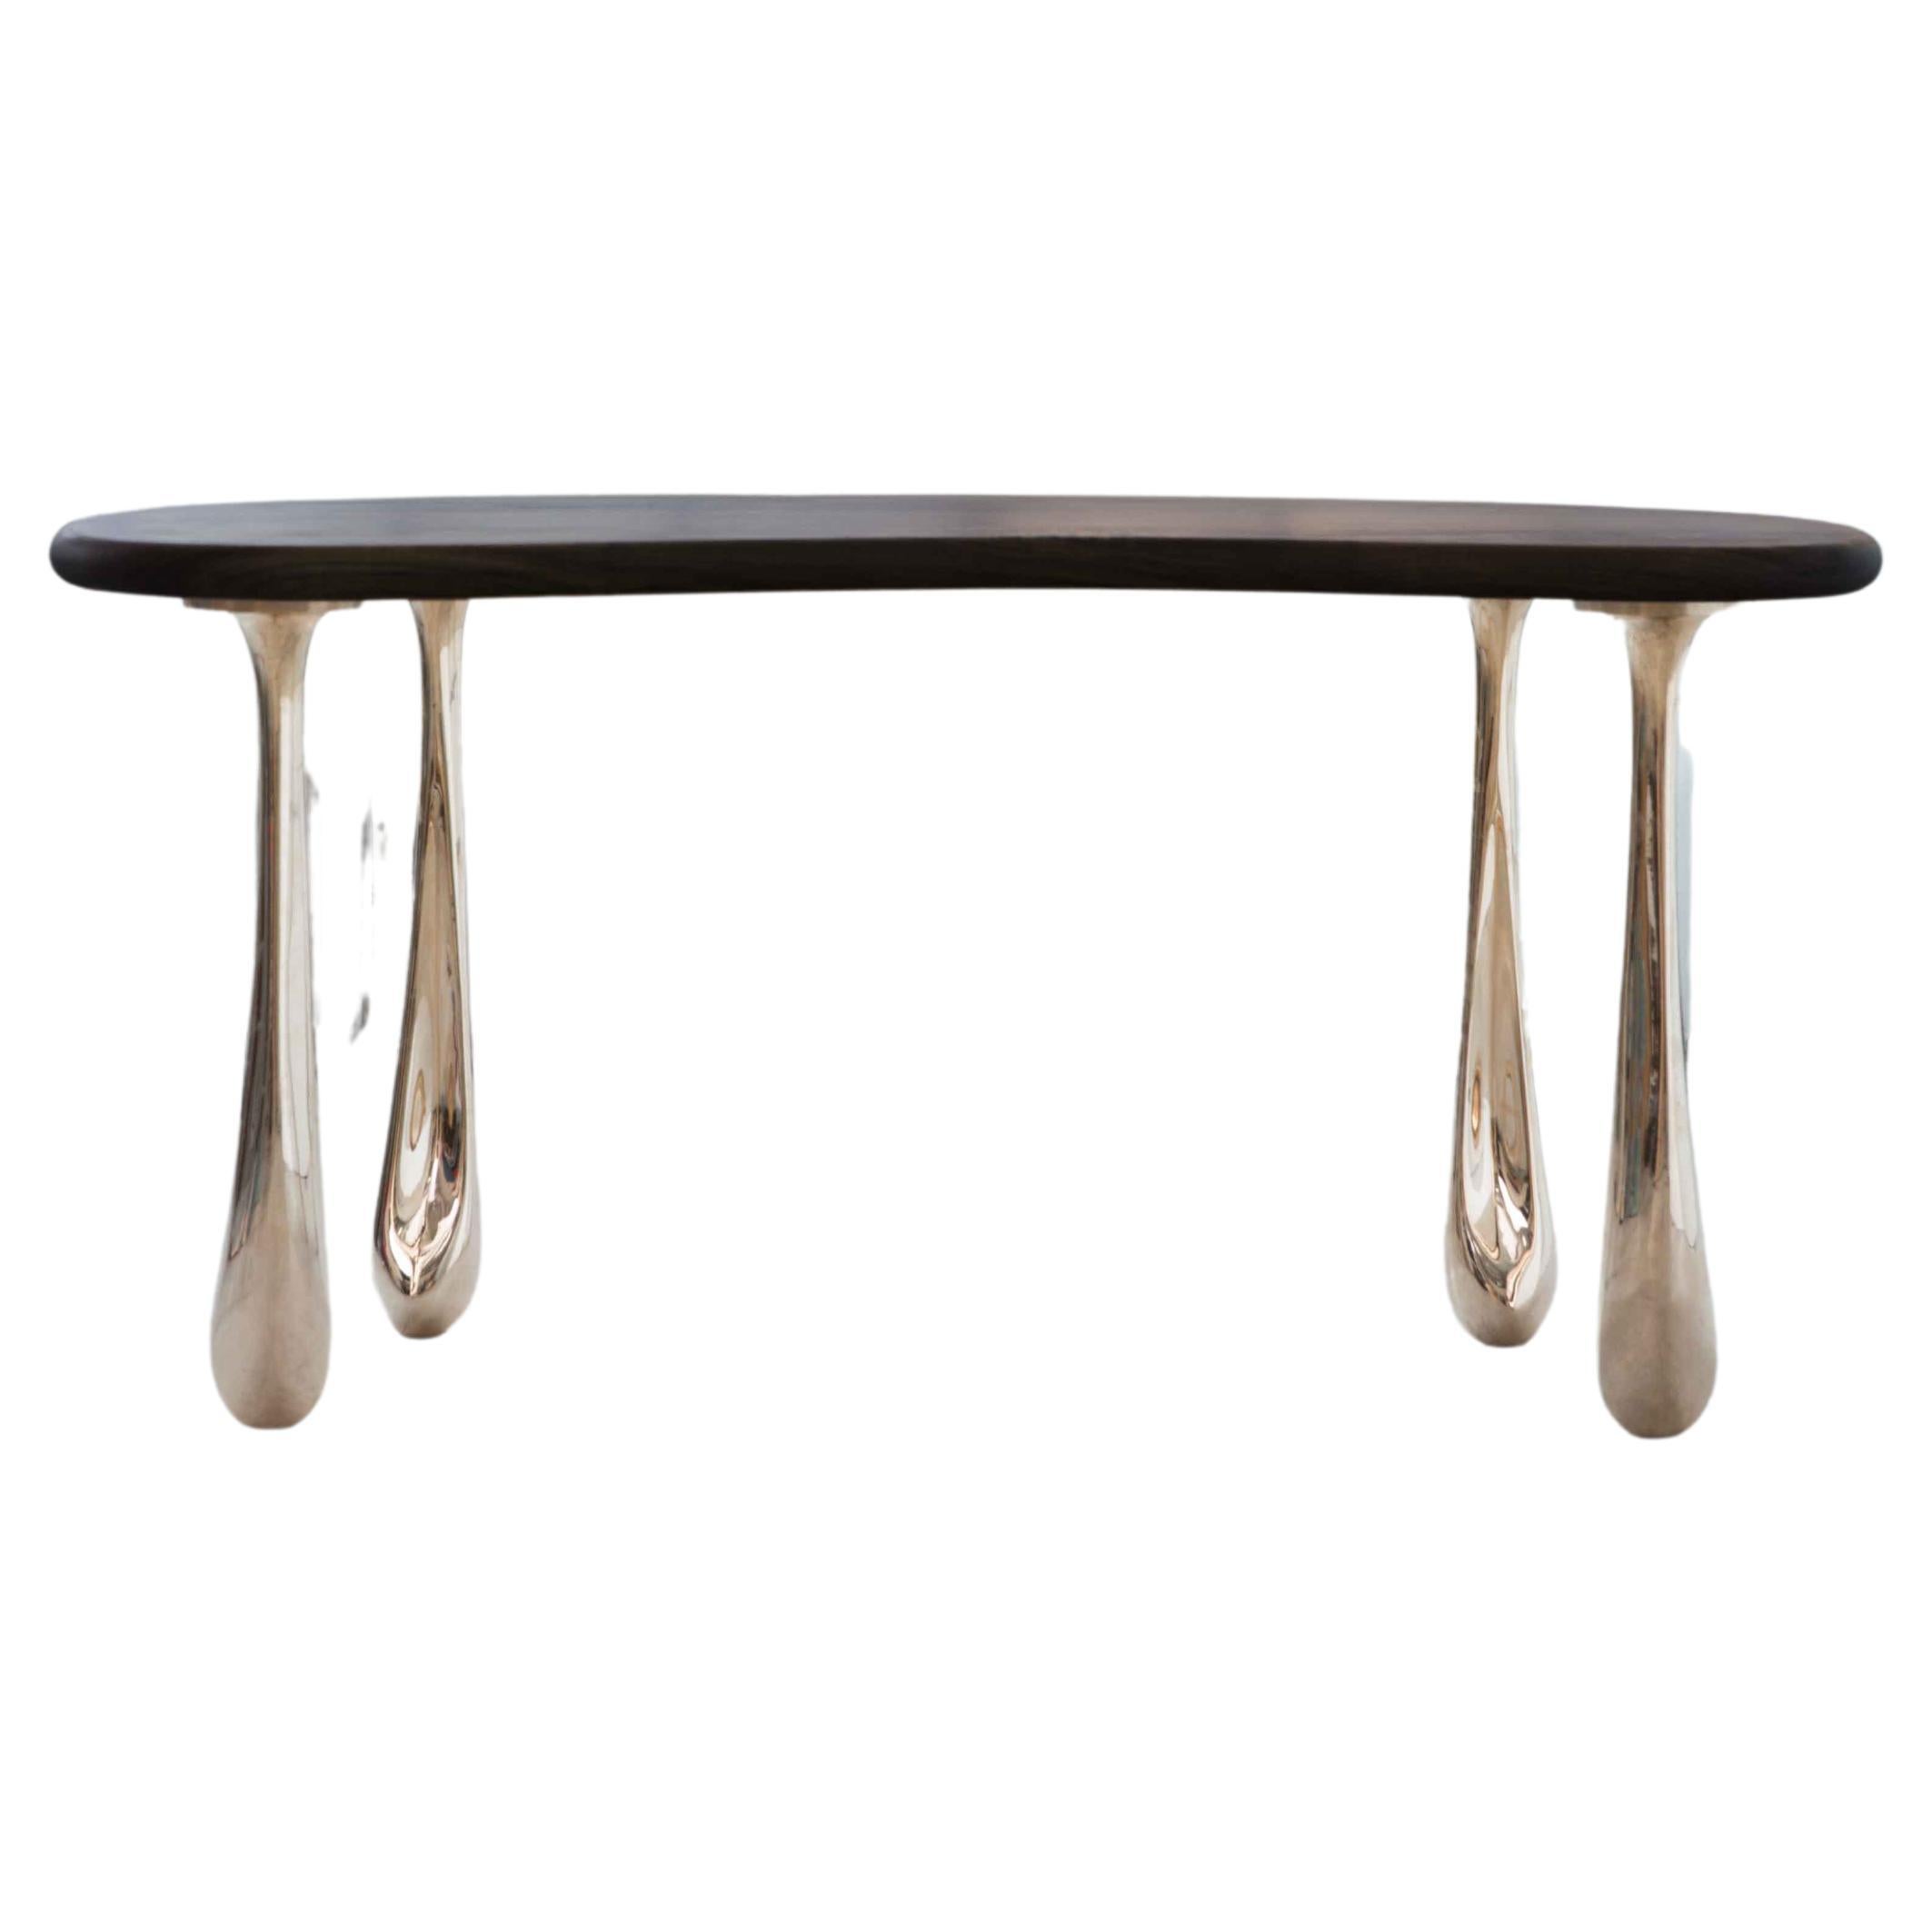 The Jupiter Dining Table pairs STACKLAB’s signature solid-bronze Jupiter leg castings with domestic hardwood table top.

The Jupiter leg is a study in creating a completely asymmetrical, yet aesthetically cohesive, geometry. The shape, derived